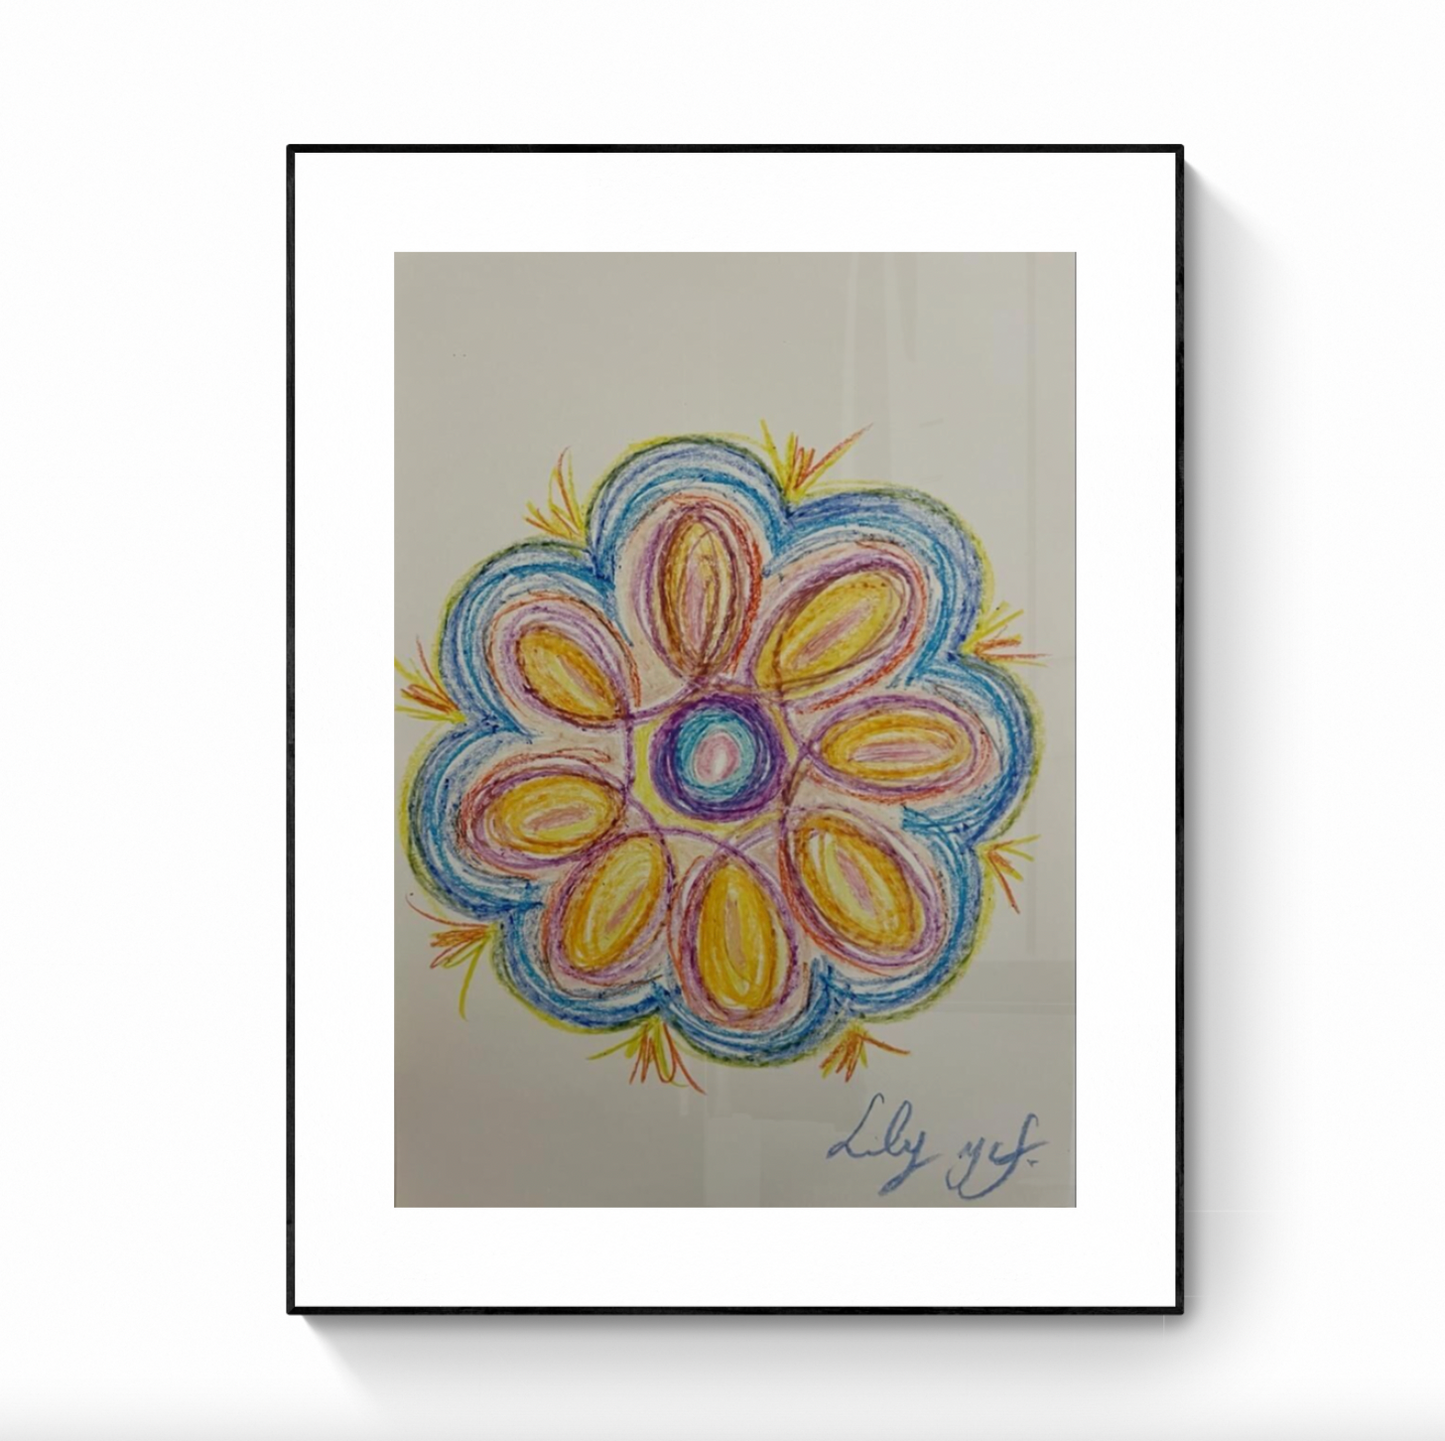 Lily ycf. Tribute to the sun - Unique pastel on Art Paper - Exclusively on LYNART Store